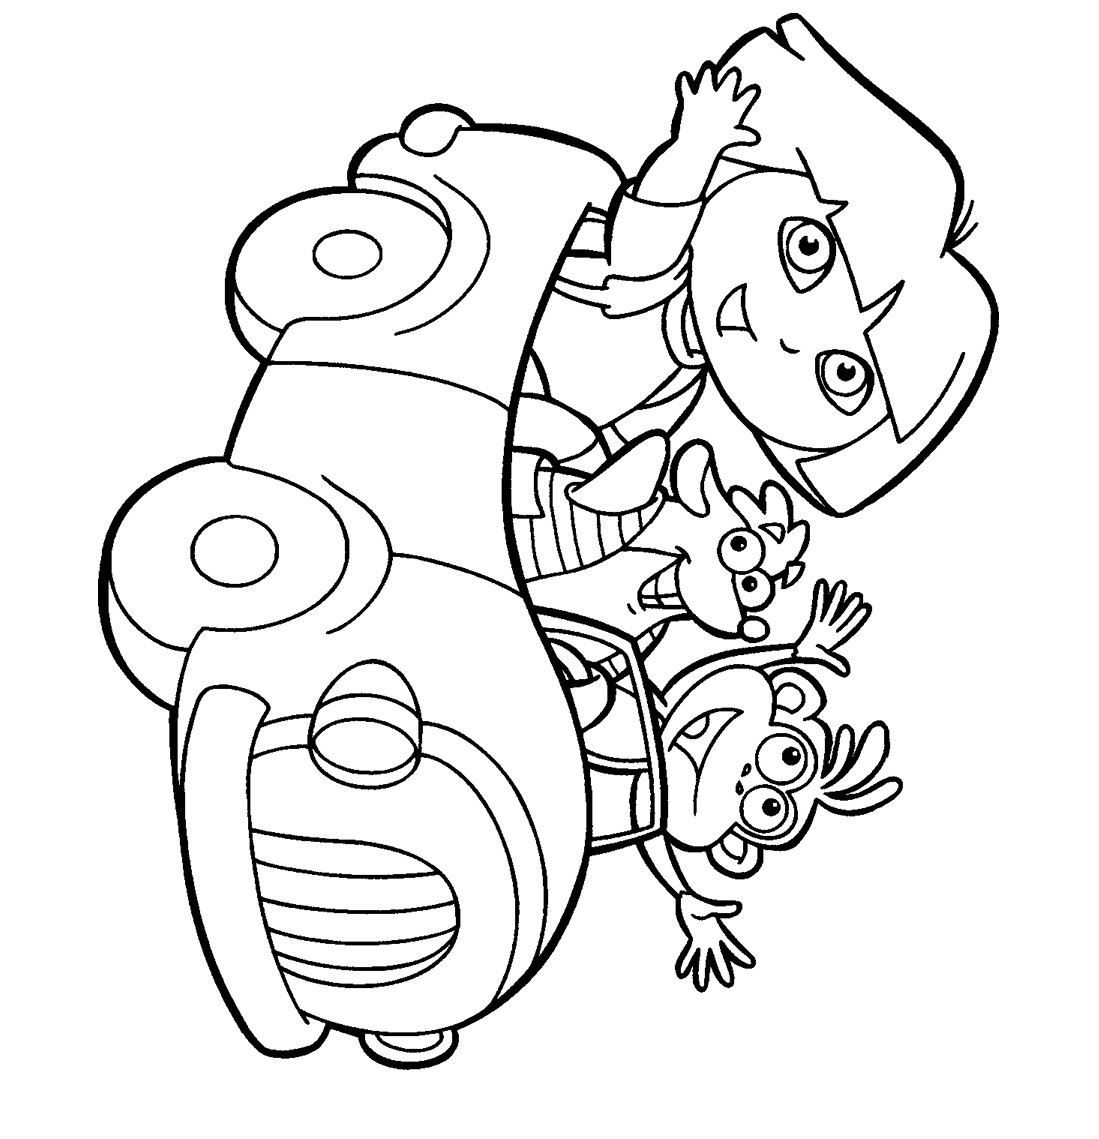 Awesome Coloring Pages For Kids
 Printable coloring pages for kids